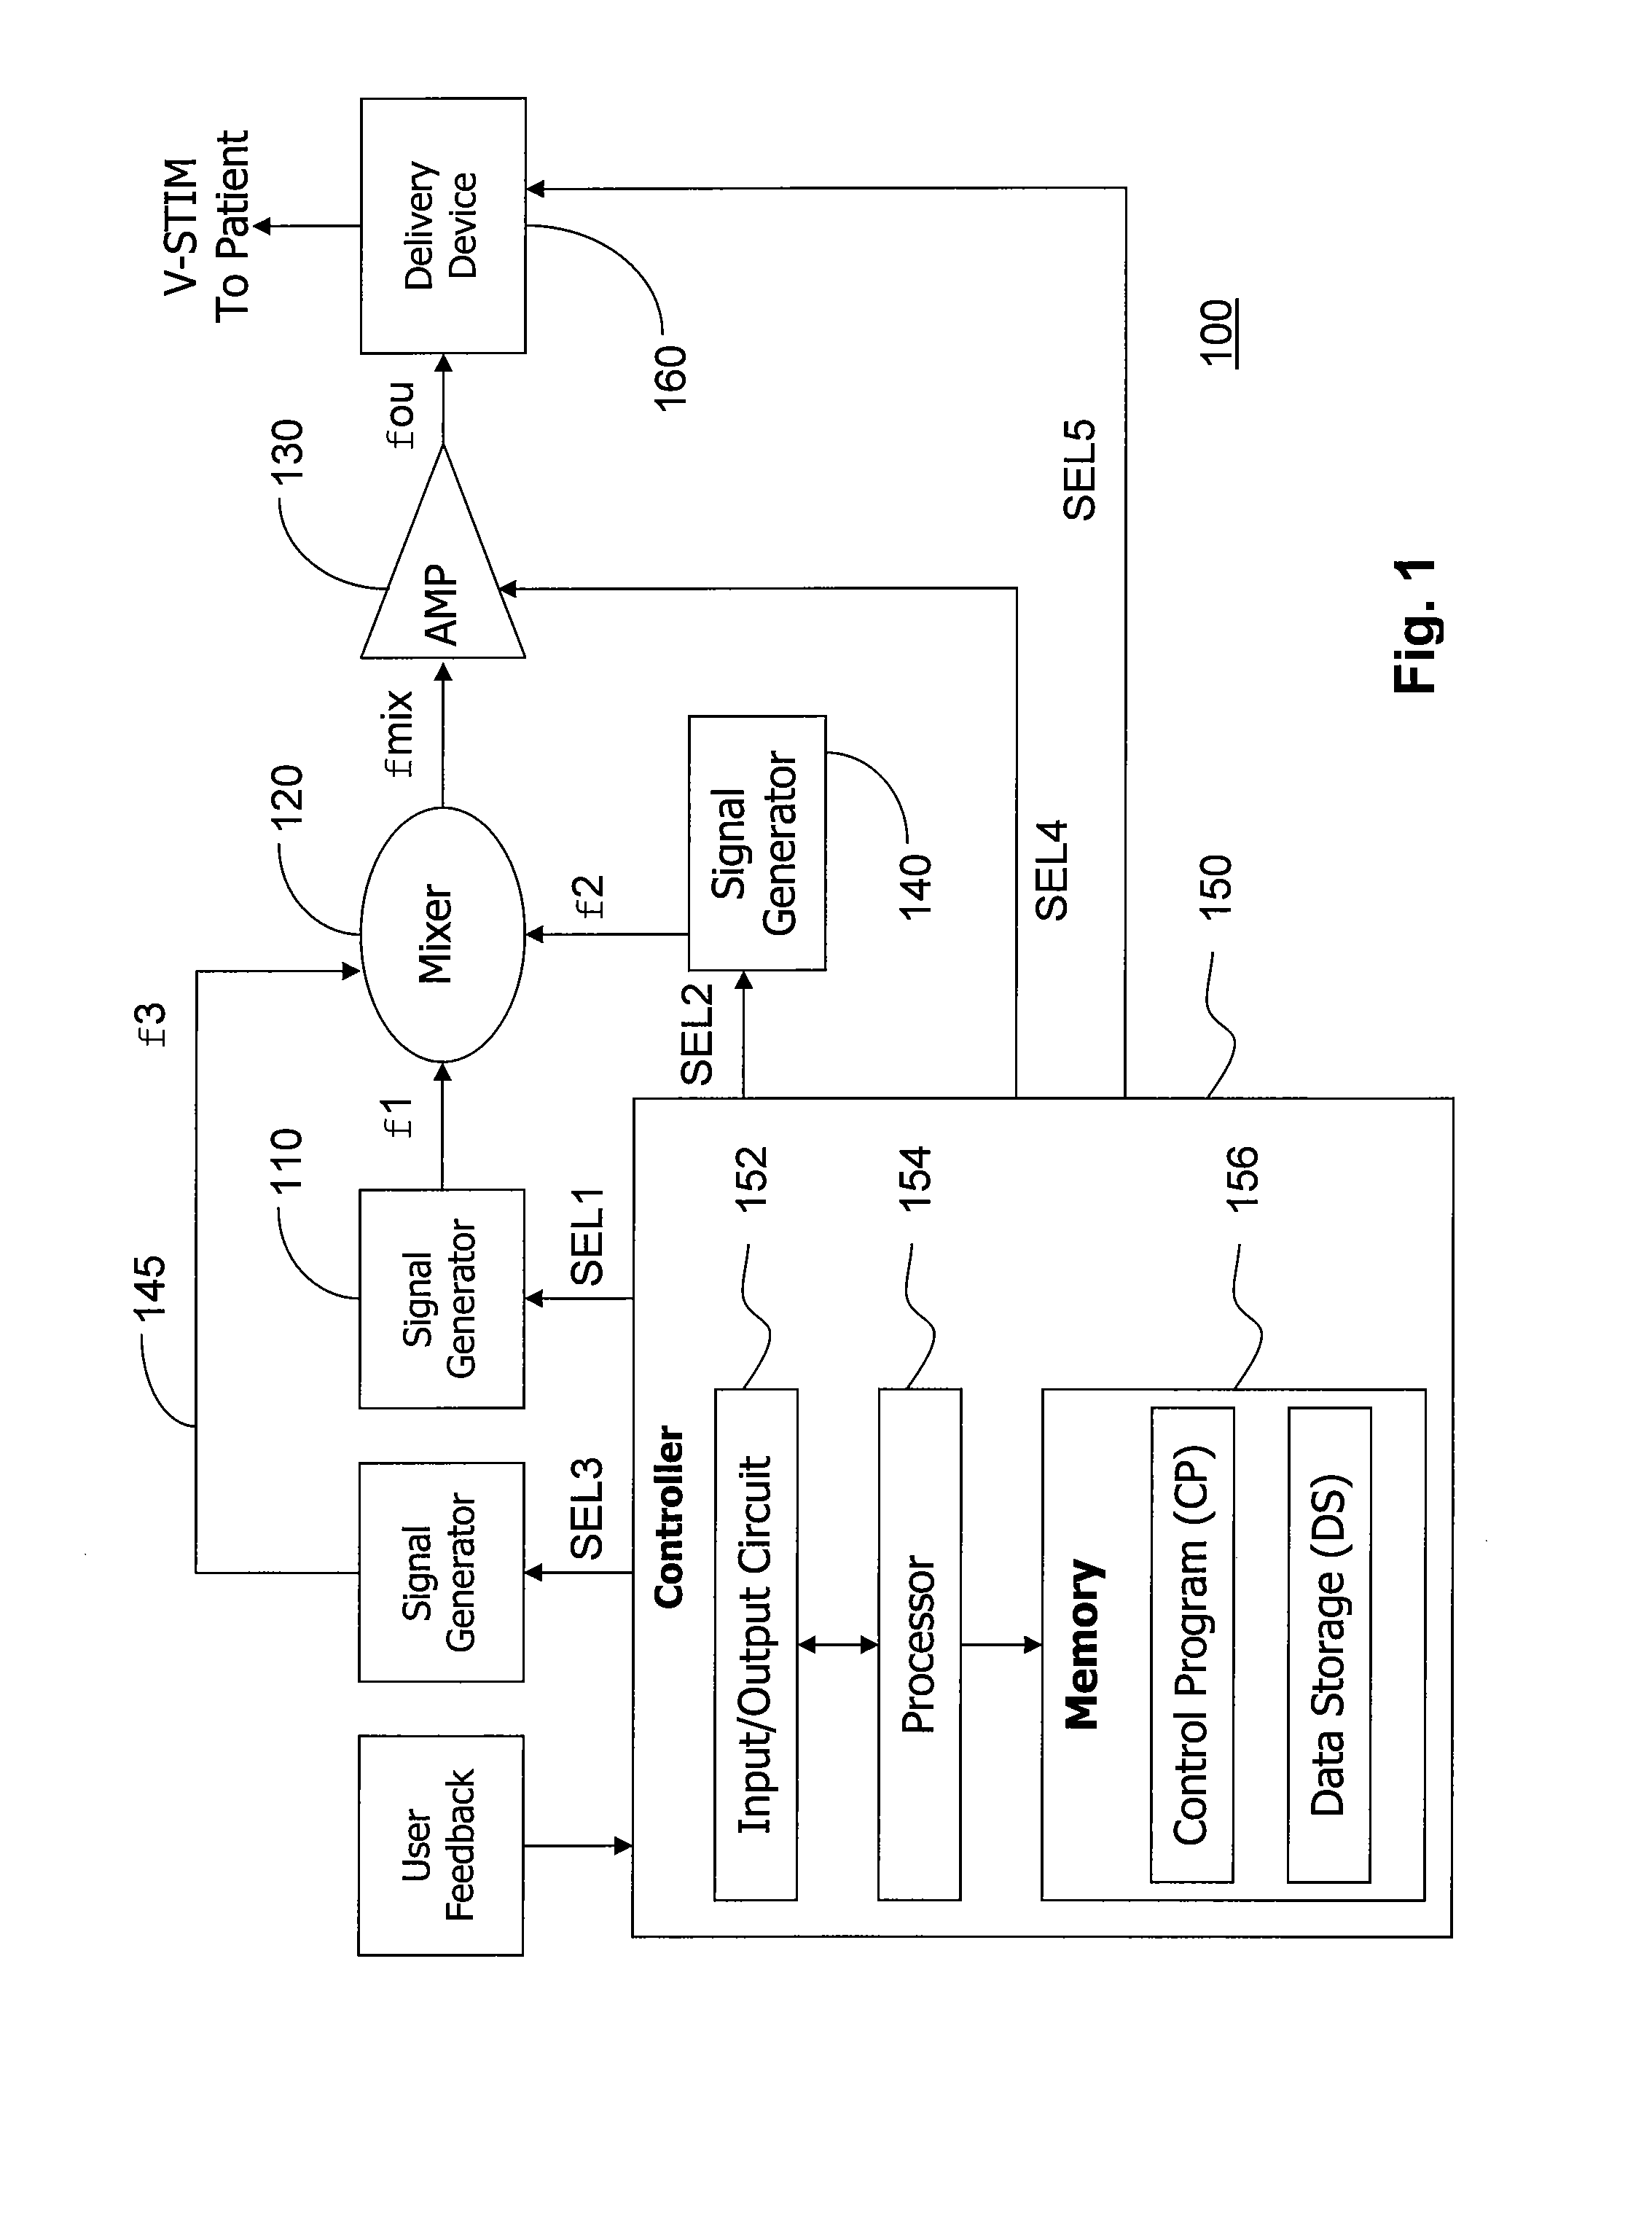 Neuromuscular therapeutic device